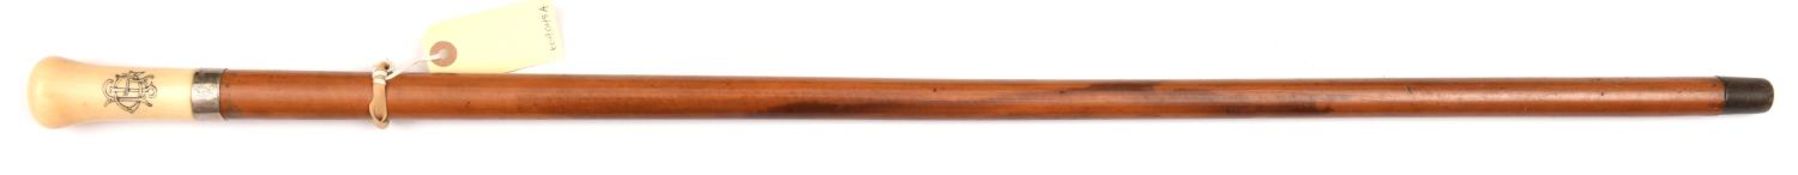 A malacca walking cane, plain silver coloured band to base of ivory grip with monogram “JGL” on